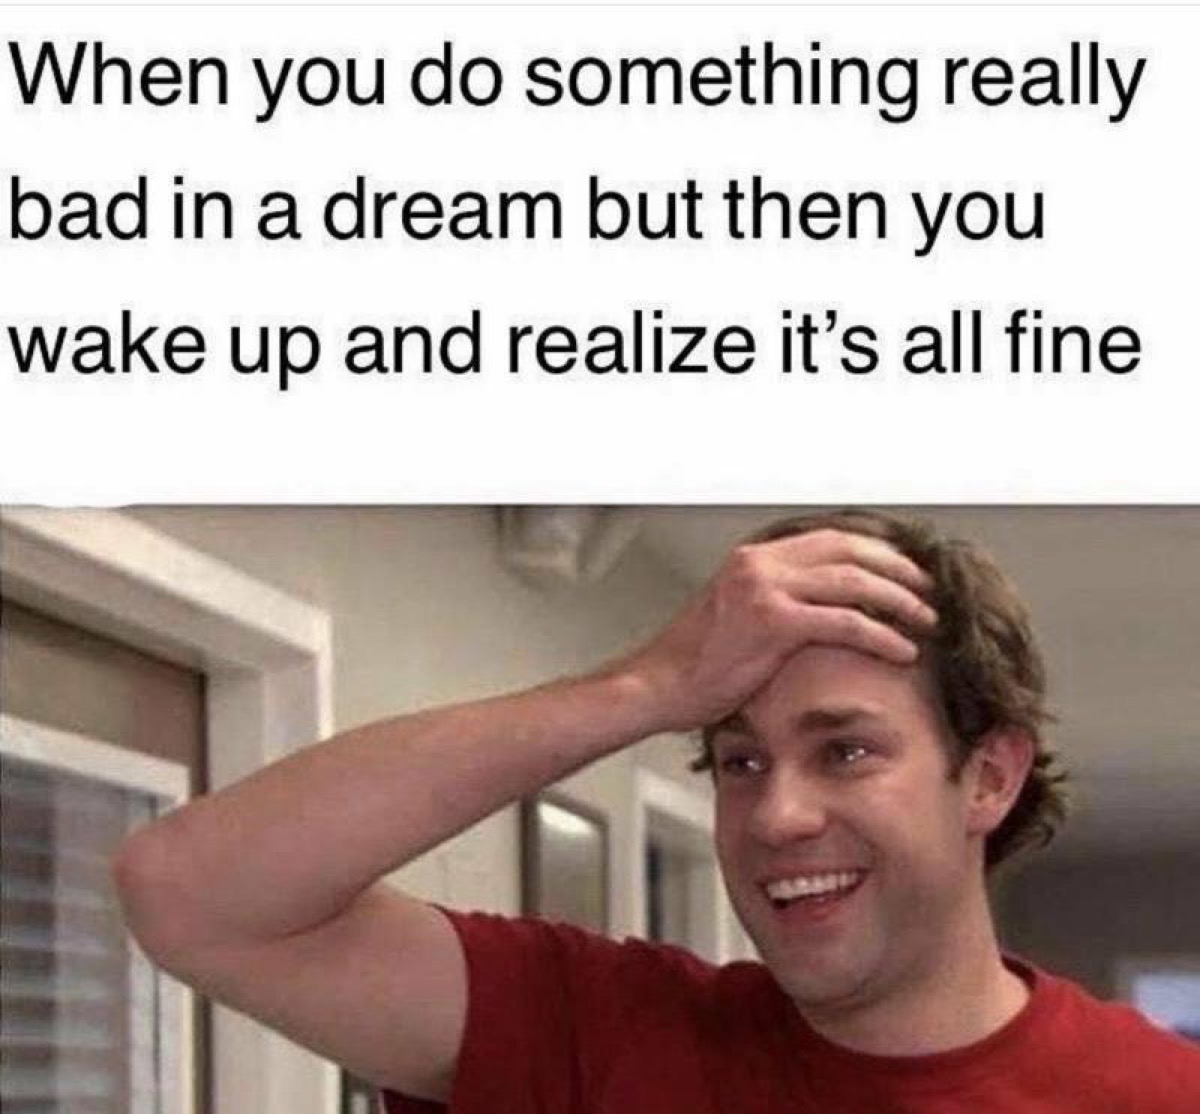 Screenshot of Jim Halpert from The Office looking happily surprised with the caption, "When you do something really bad in a dream but then you wake up and realize it's all fine."